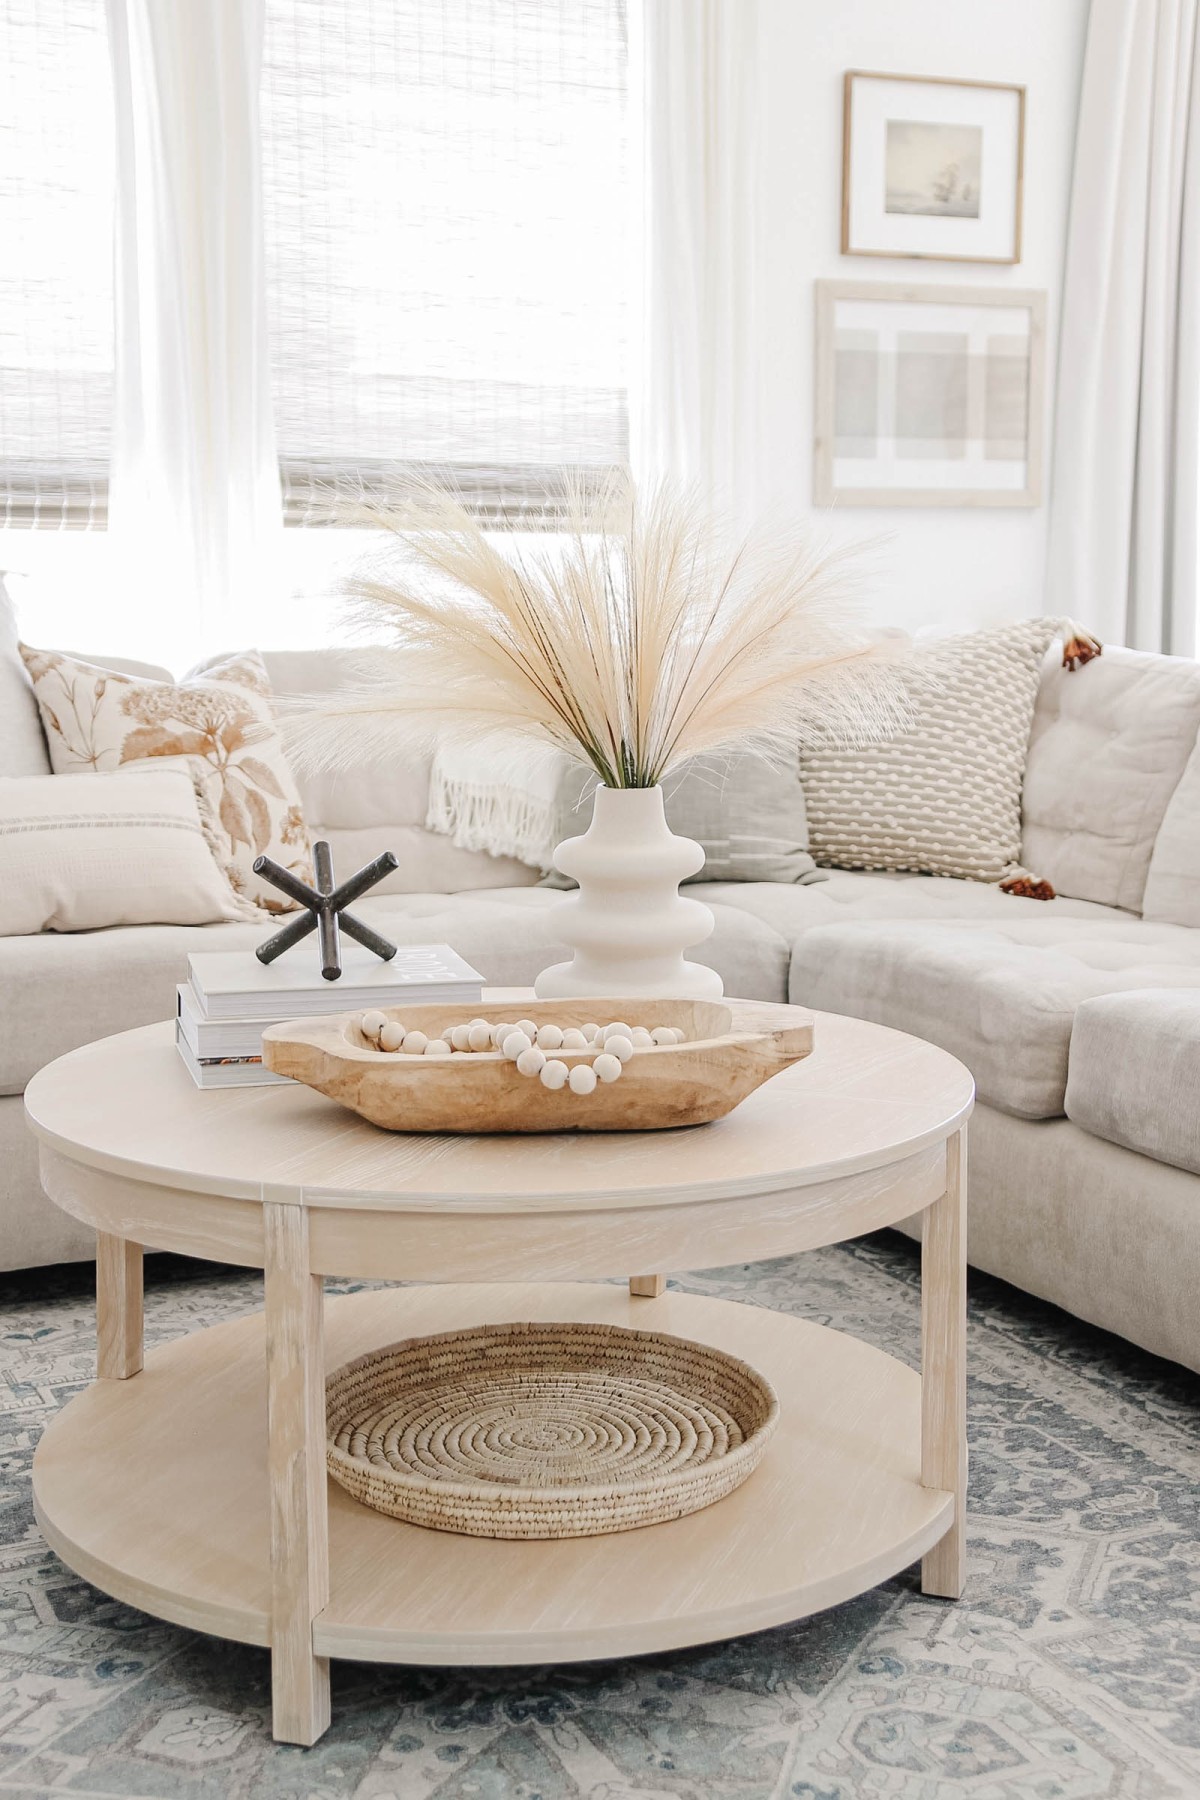 Best Round Coffee Table Styling Ideas for  - Caitlin Marie Design